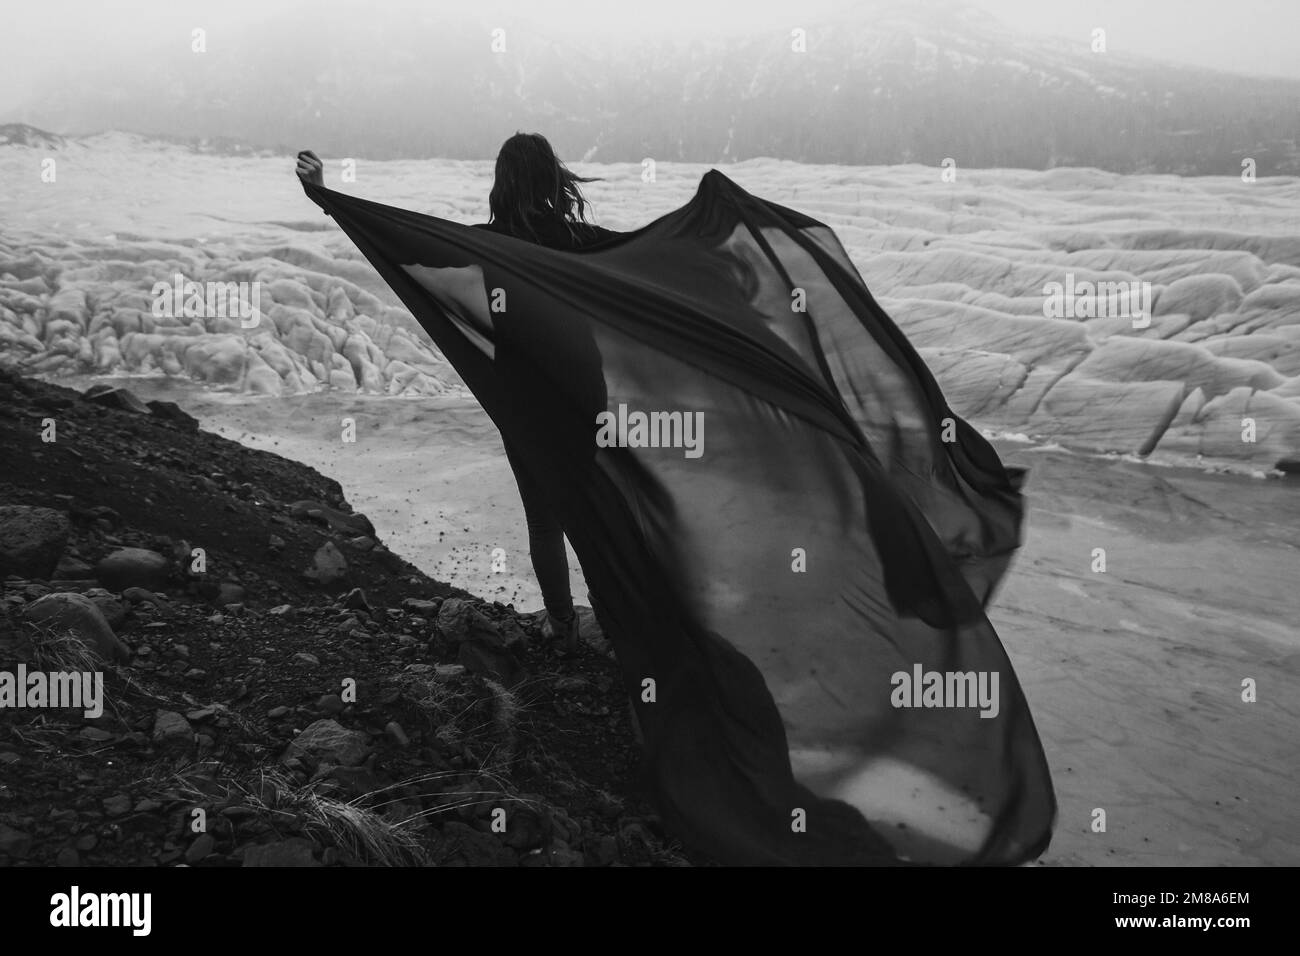 Graceful lady with waving fabric sheet monochrome scenic photography Stock Photo